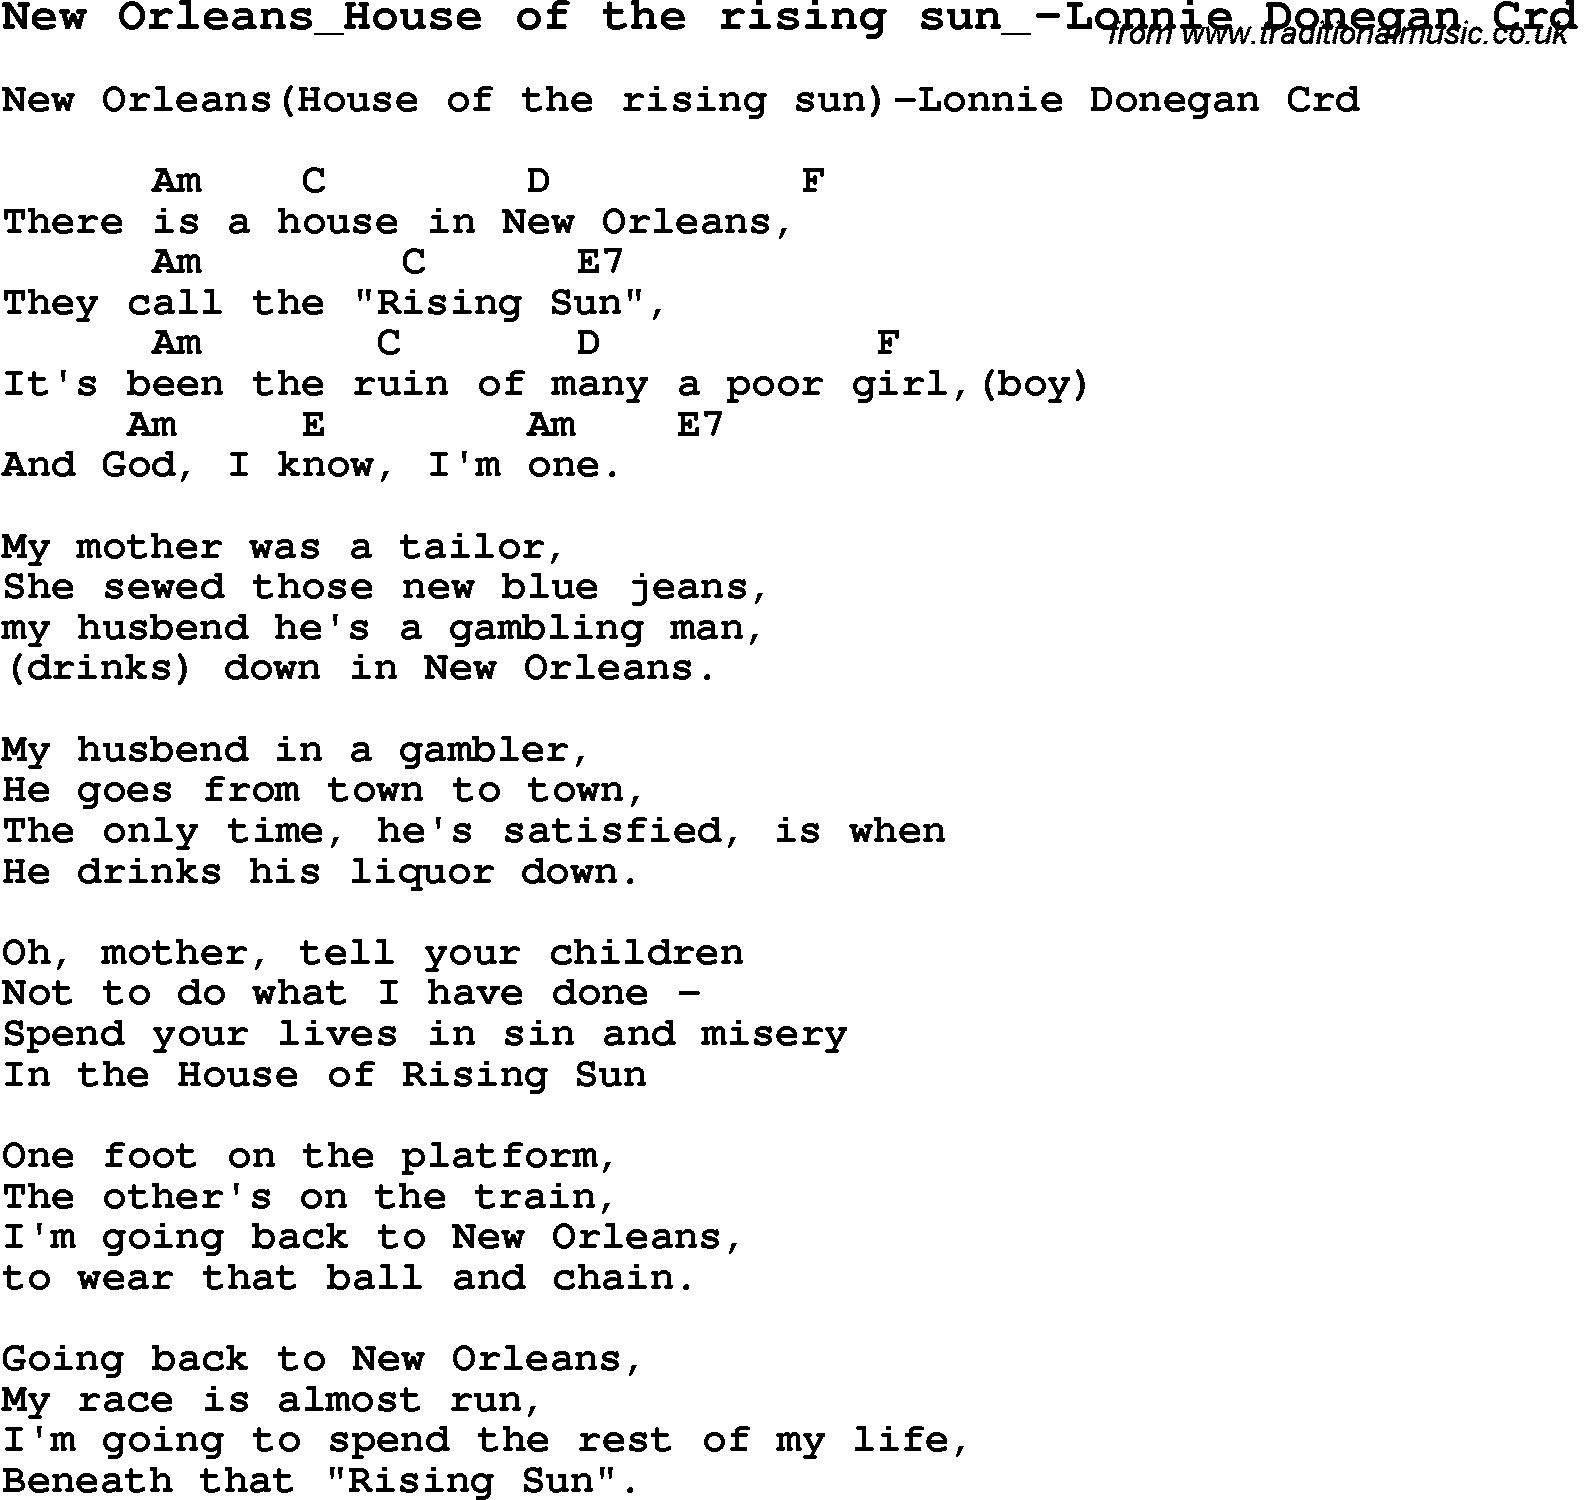 Skiffle Lyrics For New Orleans House Of The Rising Sun Lonnie Donegan With Chords For Mandolin Ukulele Guitar Banjo Etc,Best Black Paint For Bathroom Cabinets